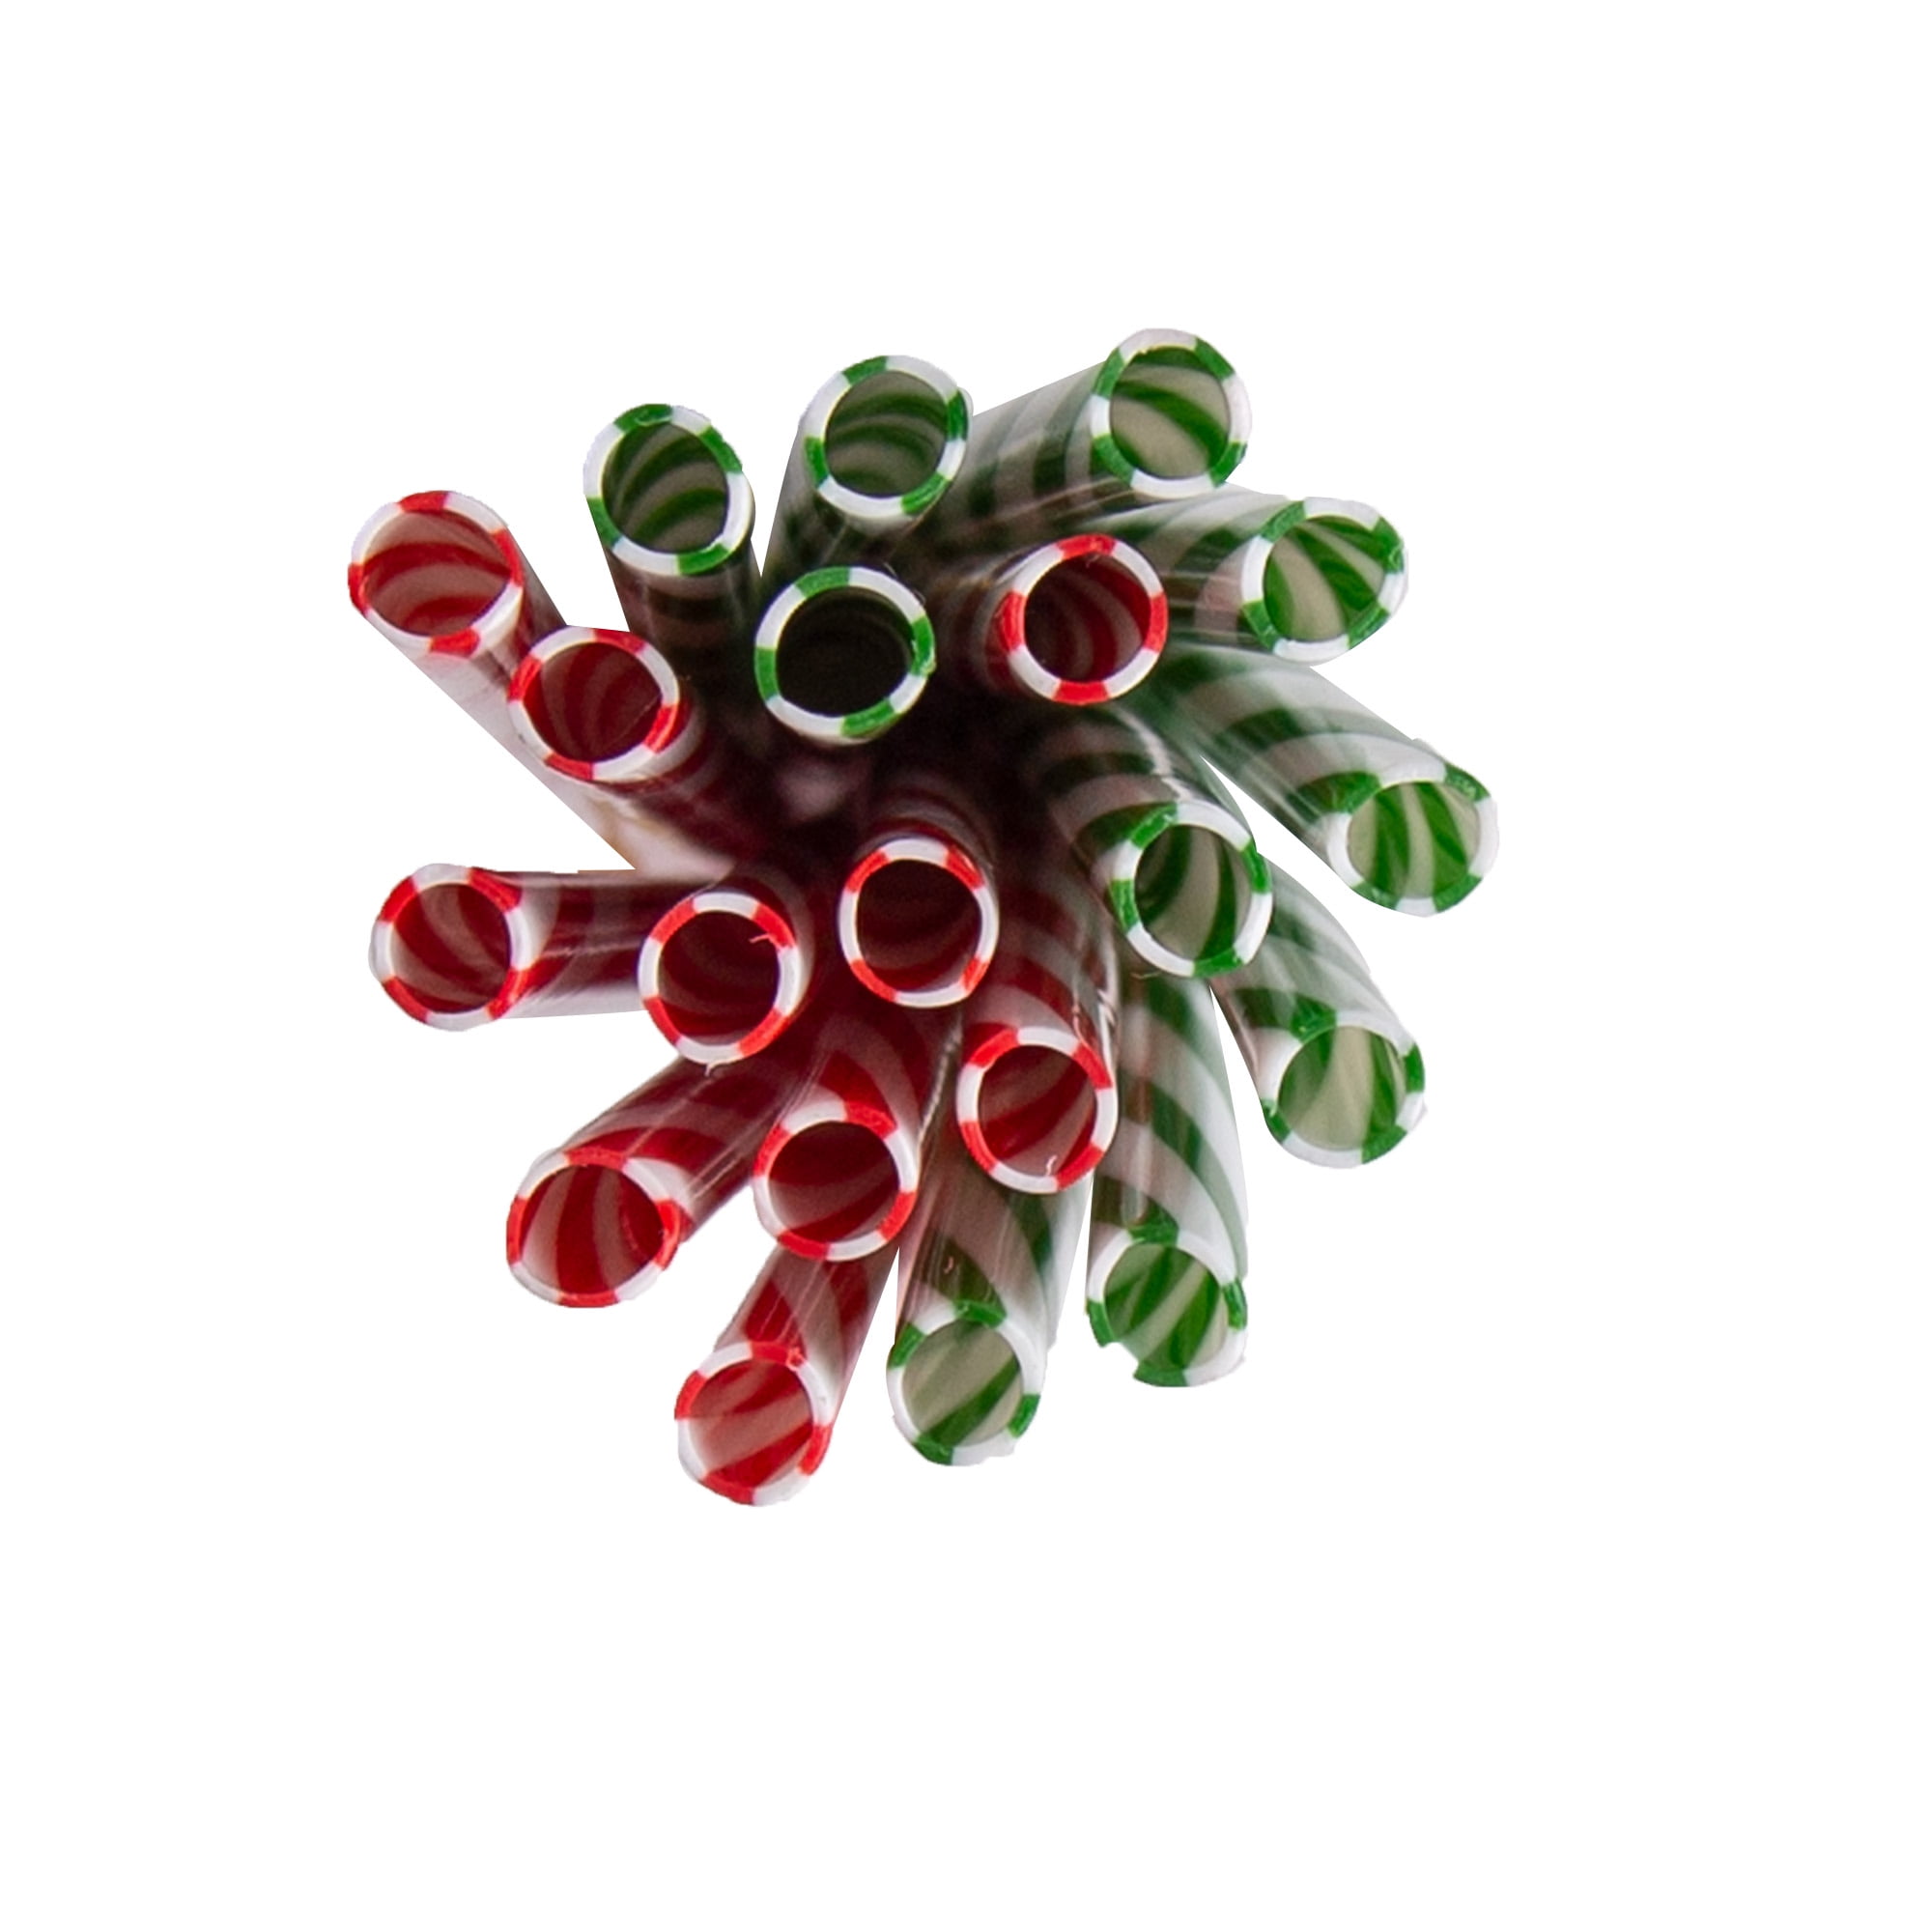 Christmas Foil Straws 25 Pack Red and Green Striped Christmas Straws,  Tinsel Straws, Holiday Party Straws 